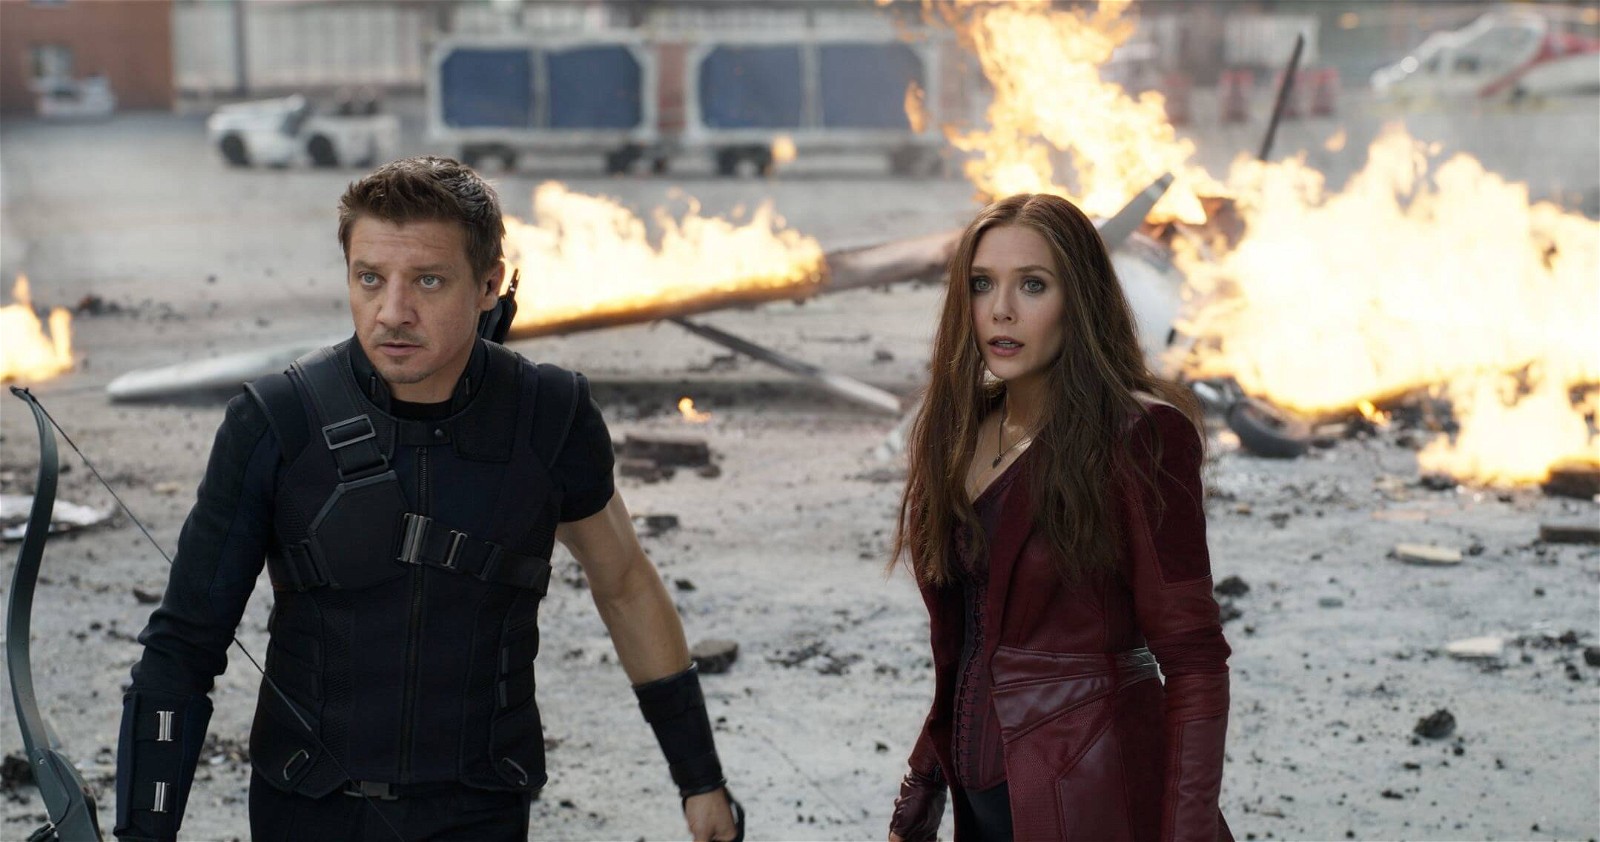 Jeremy Renner as Hawkeye and Elizabeth Olsen as the Scarlett Witch in a still from Avengers: Age of Ultron (2015)